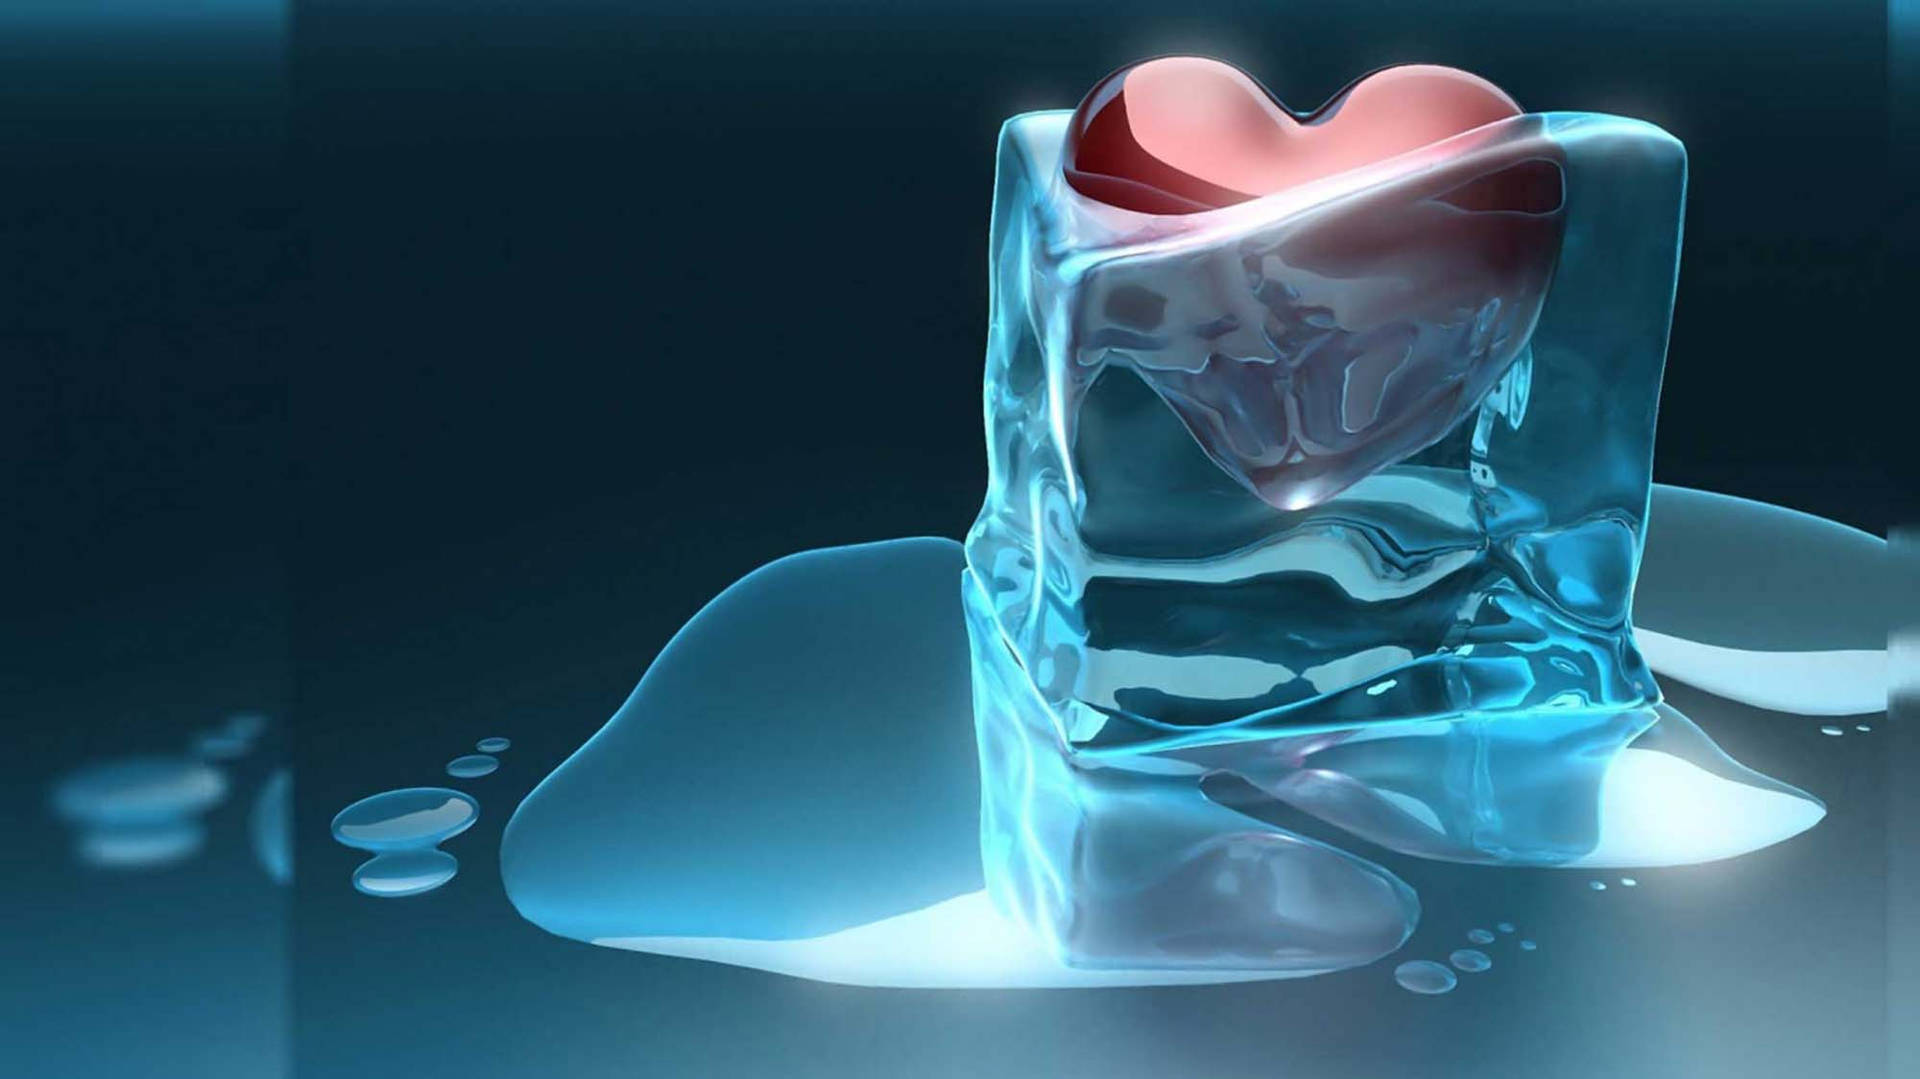 Download 3D Cold Ice Heart Wallpaper